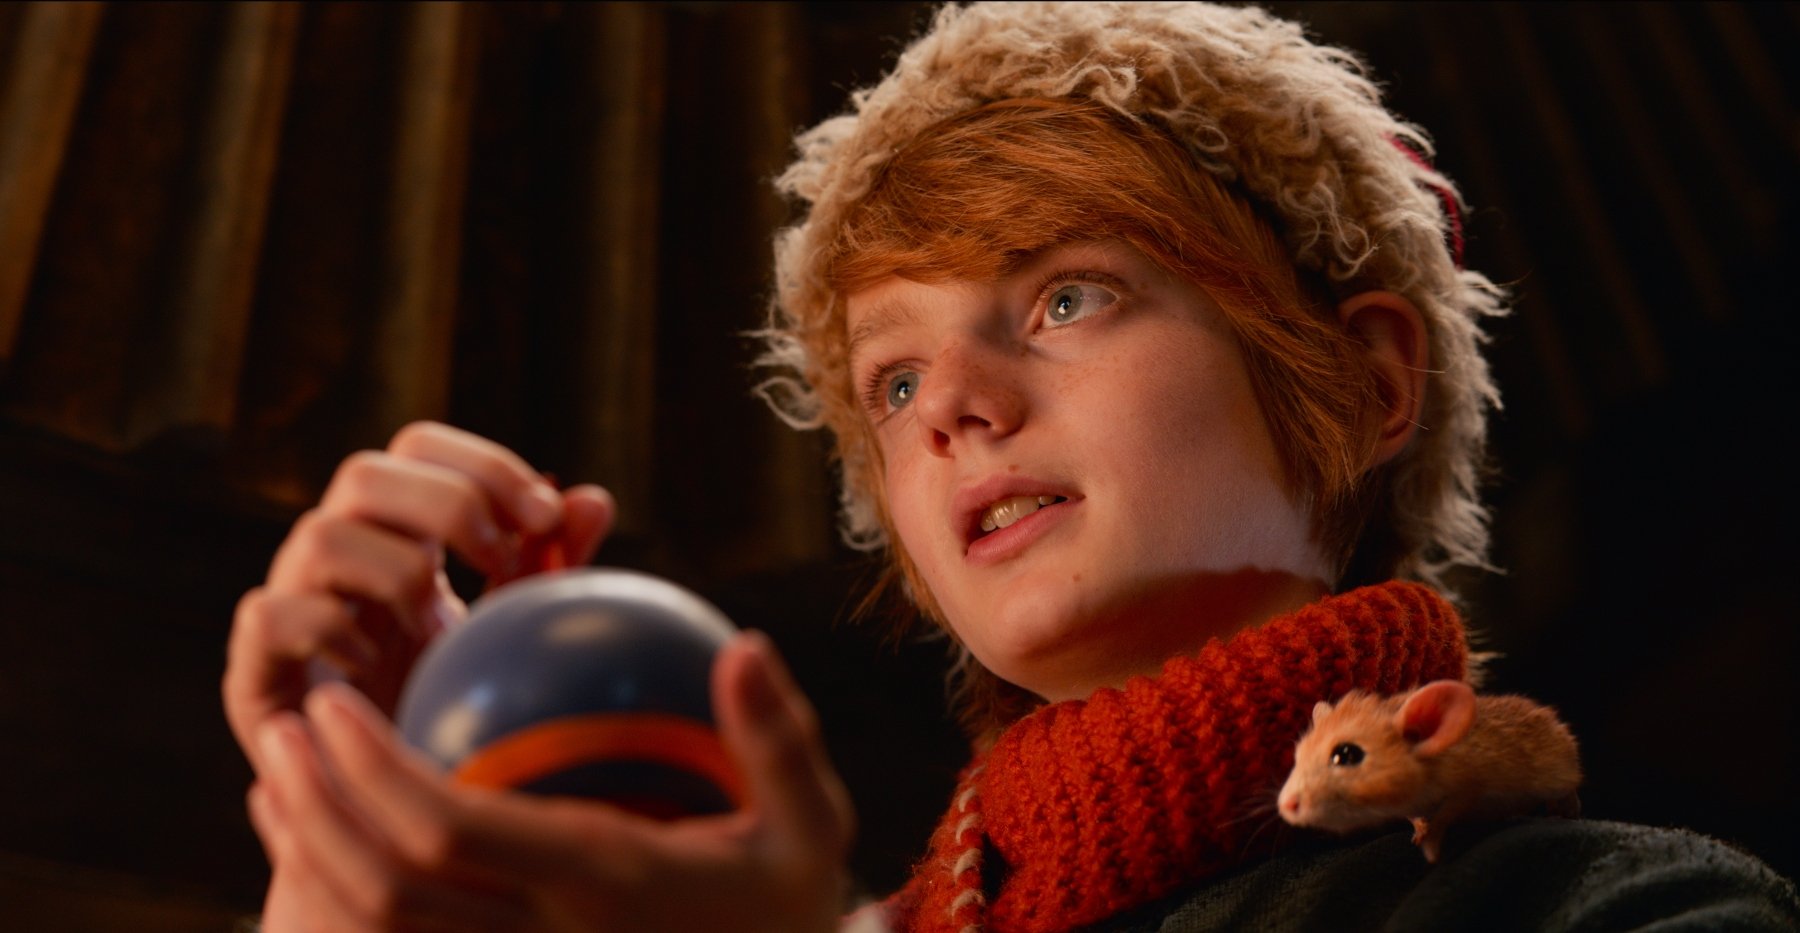 Nikolas holding a toy in 'A Boy Called Christmas'